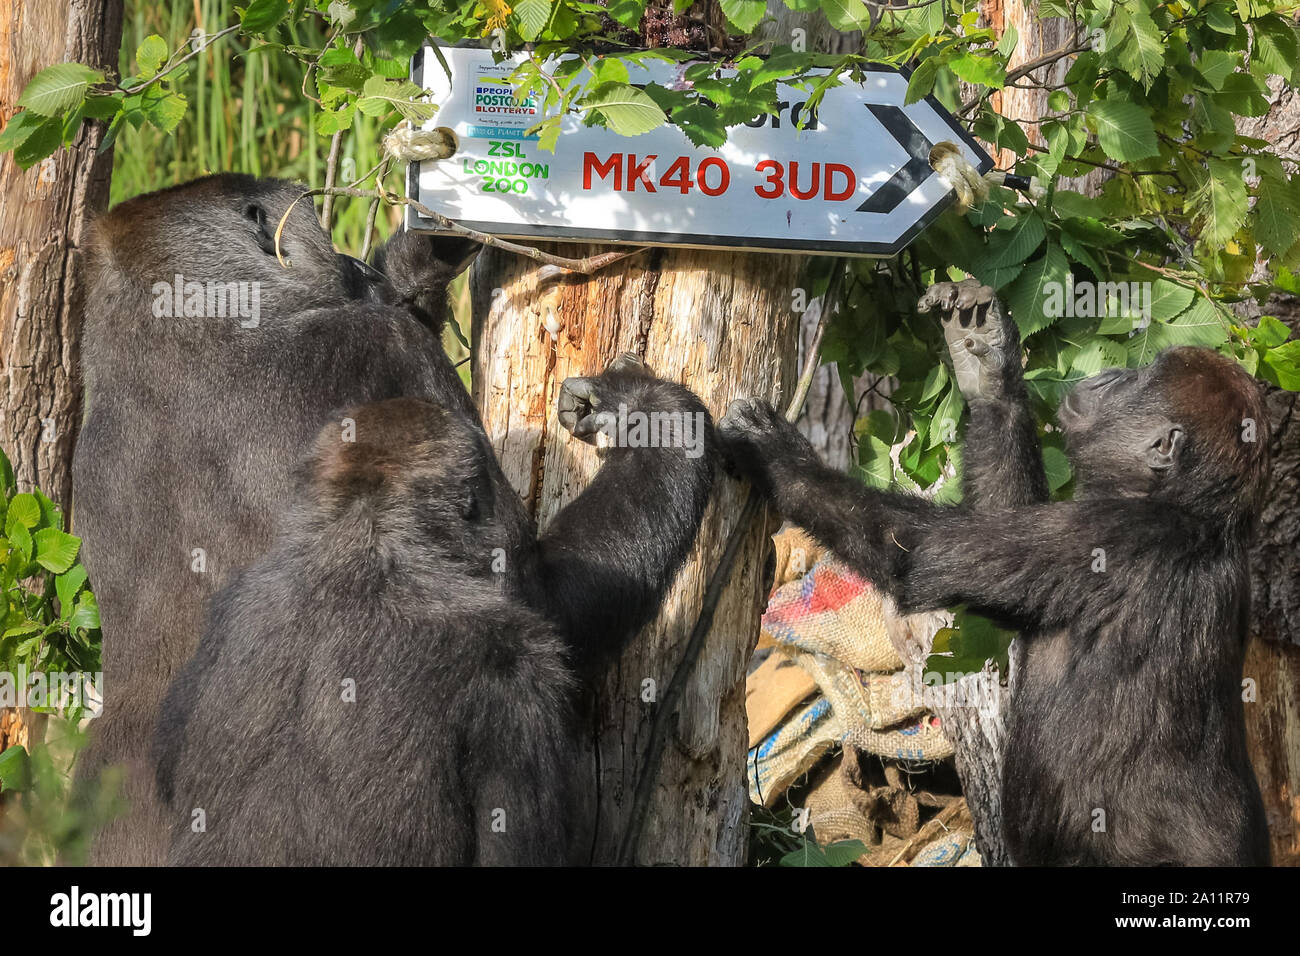 London, UK. 23rd Sep 2019. Dad Kumbuka investigates the post code with his offspring, Alika and Gernot. ZSL London Zoo's troop of western lowland gorillas celebrate World Gorilla Day by revealing today's lucky winners of the People's Postcode Lottery, with the postcode on a road sign. ZSL's Conservation charity, including its work with gorilla populations in Cameroon, is supported by the People's Postcode Lottery.  NOTE: EMBARGOED UNTIL 24th SEP, pics can go into print an online as of tomorrow morning and can go onto the news feed Credit: Imageplotter/Alamy Live News Stock Photo